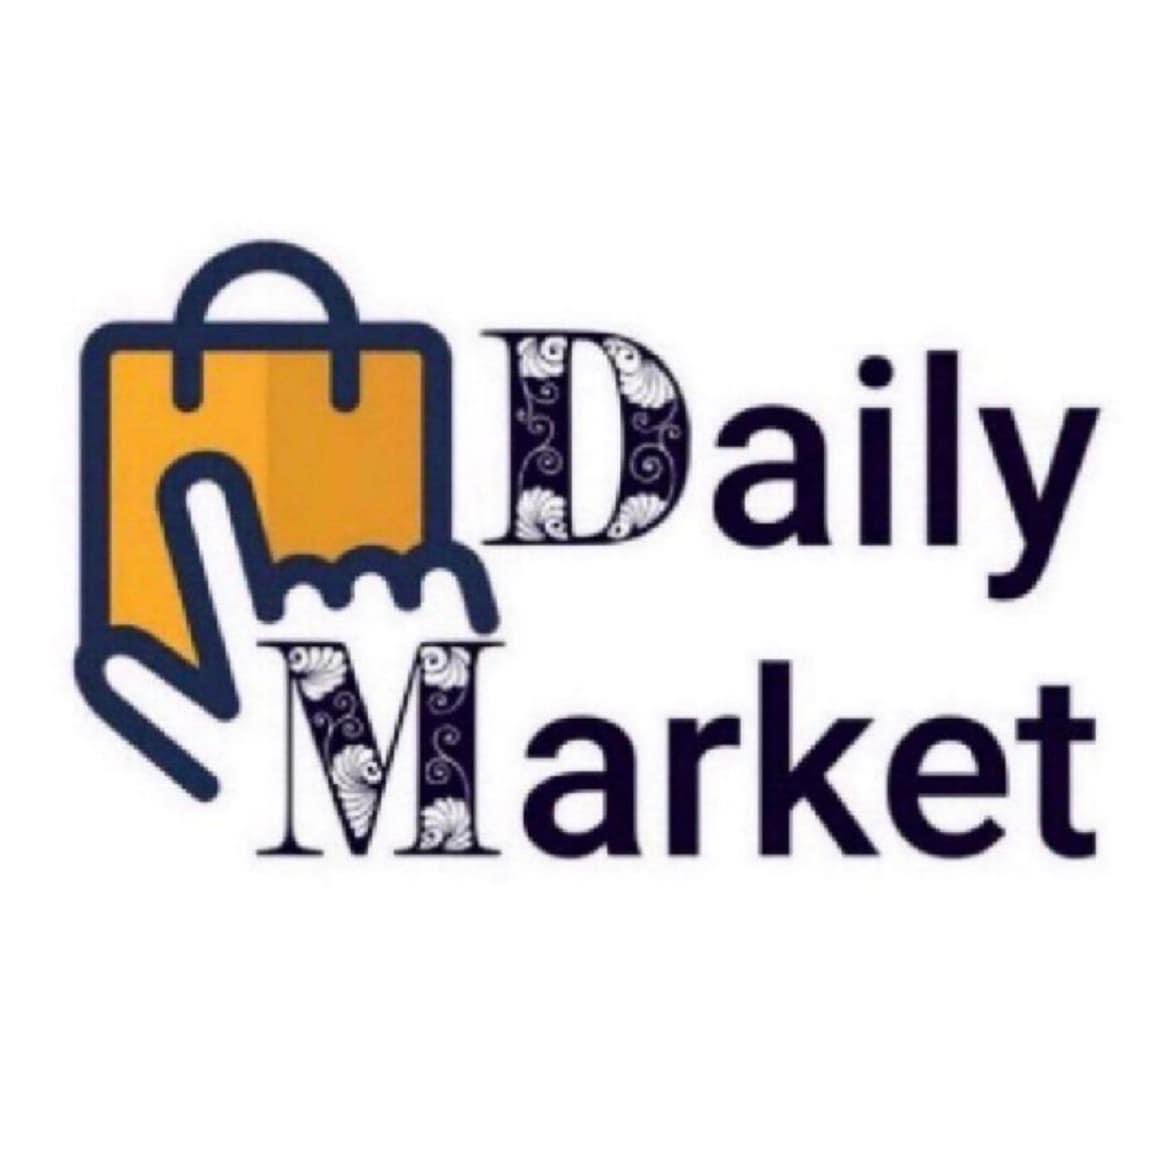 The Daily Market is now open. This is an initiative to help small businesses get visibility using my social media platforms. Advertise the goods and services that you are selling here for free. People usually respond to adverts with phone numbers and product/services prices.